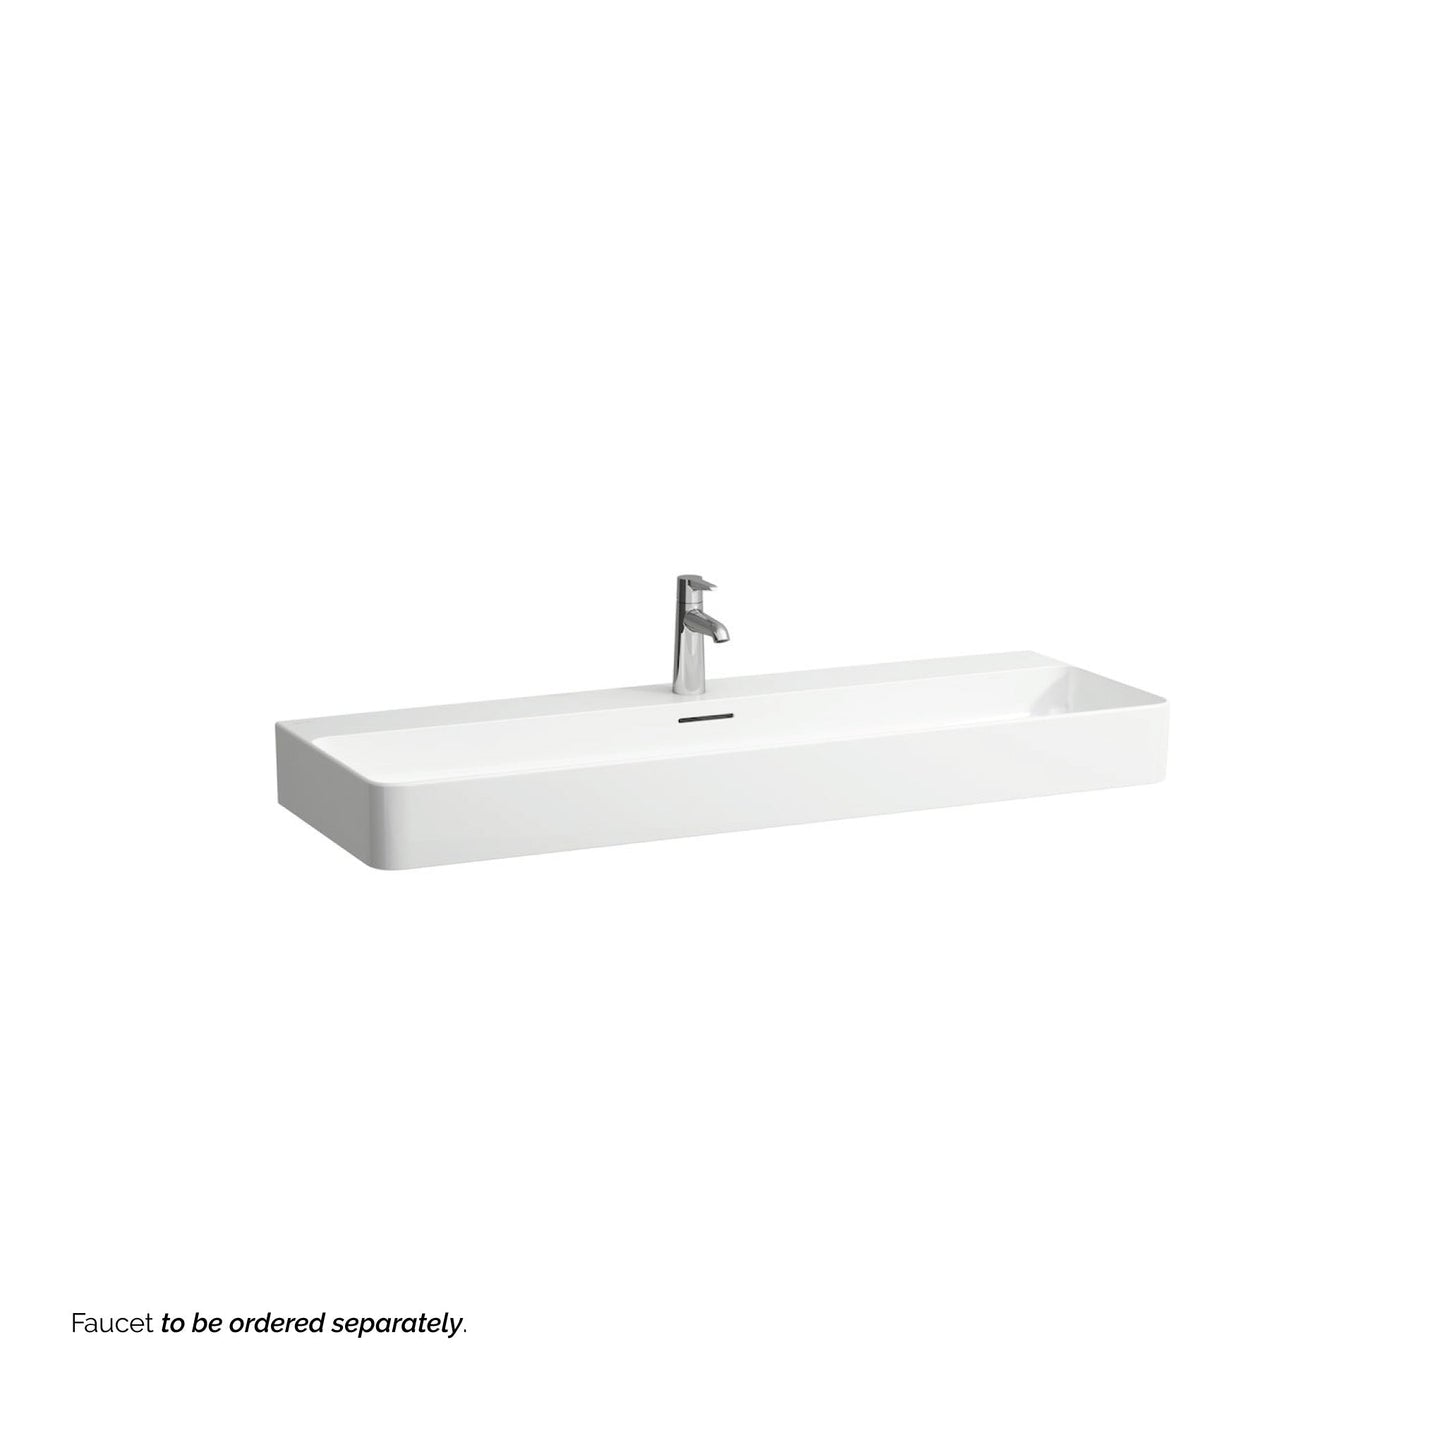 Laufen Val 47" x 17" White Ceramic Wall-Mounted Bathroom Sink With Faucet Hole